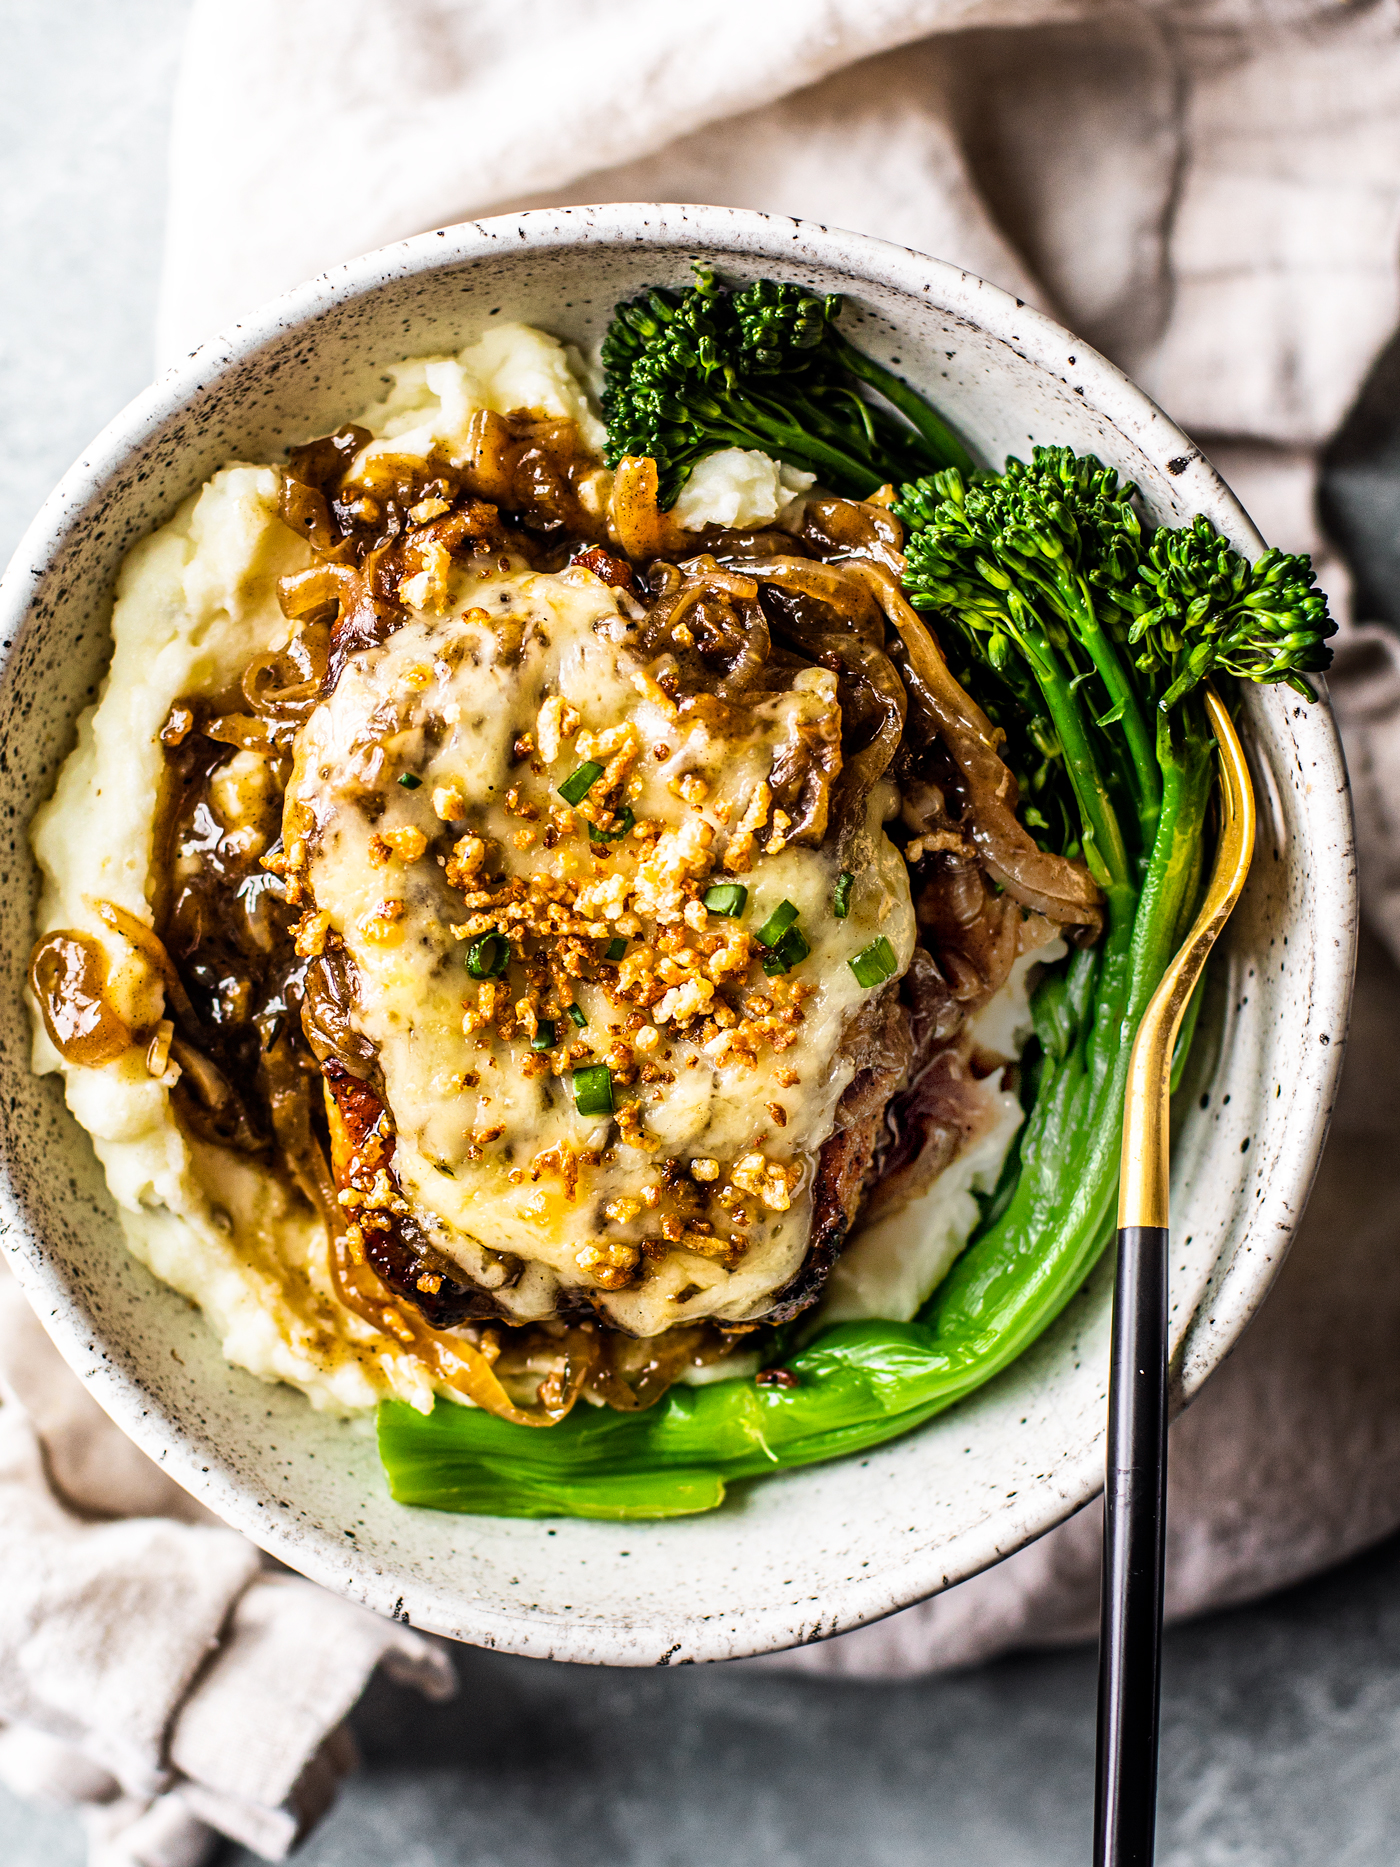 Cheese-topped pork chop with gravy on top of mashed potatoes in a bowl with broccolini.